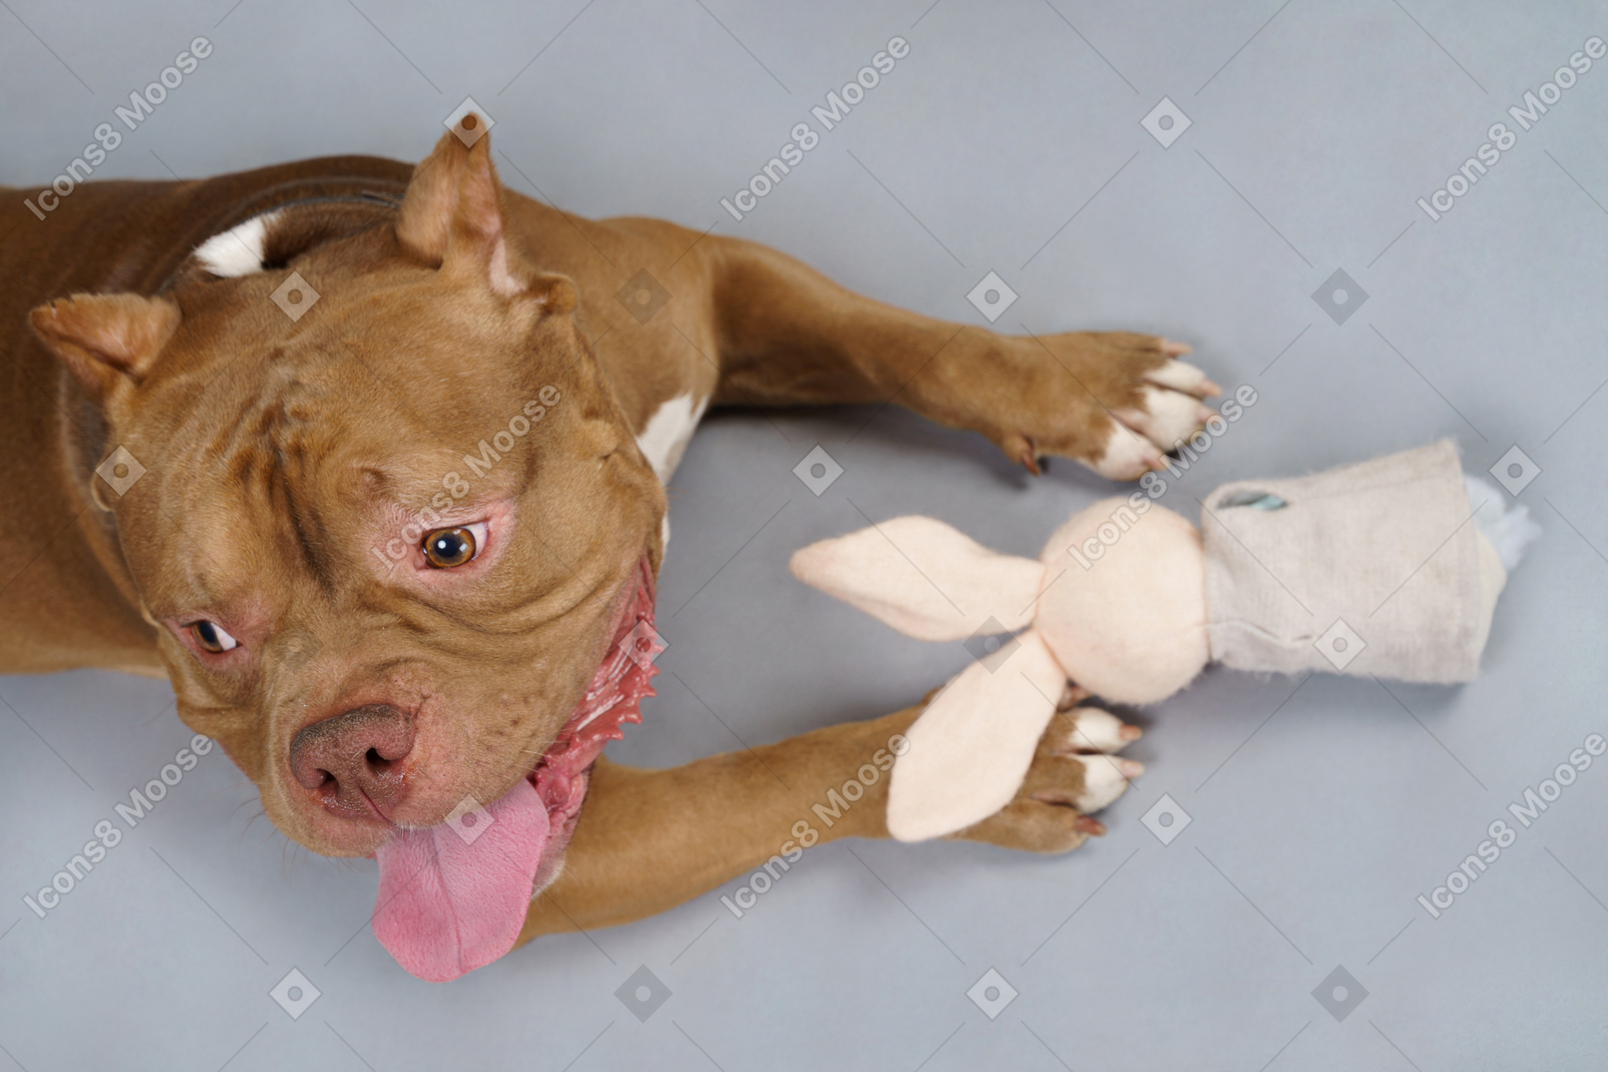 From above view of a brown bulldog with a toy bunny looking aside